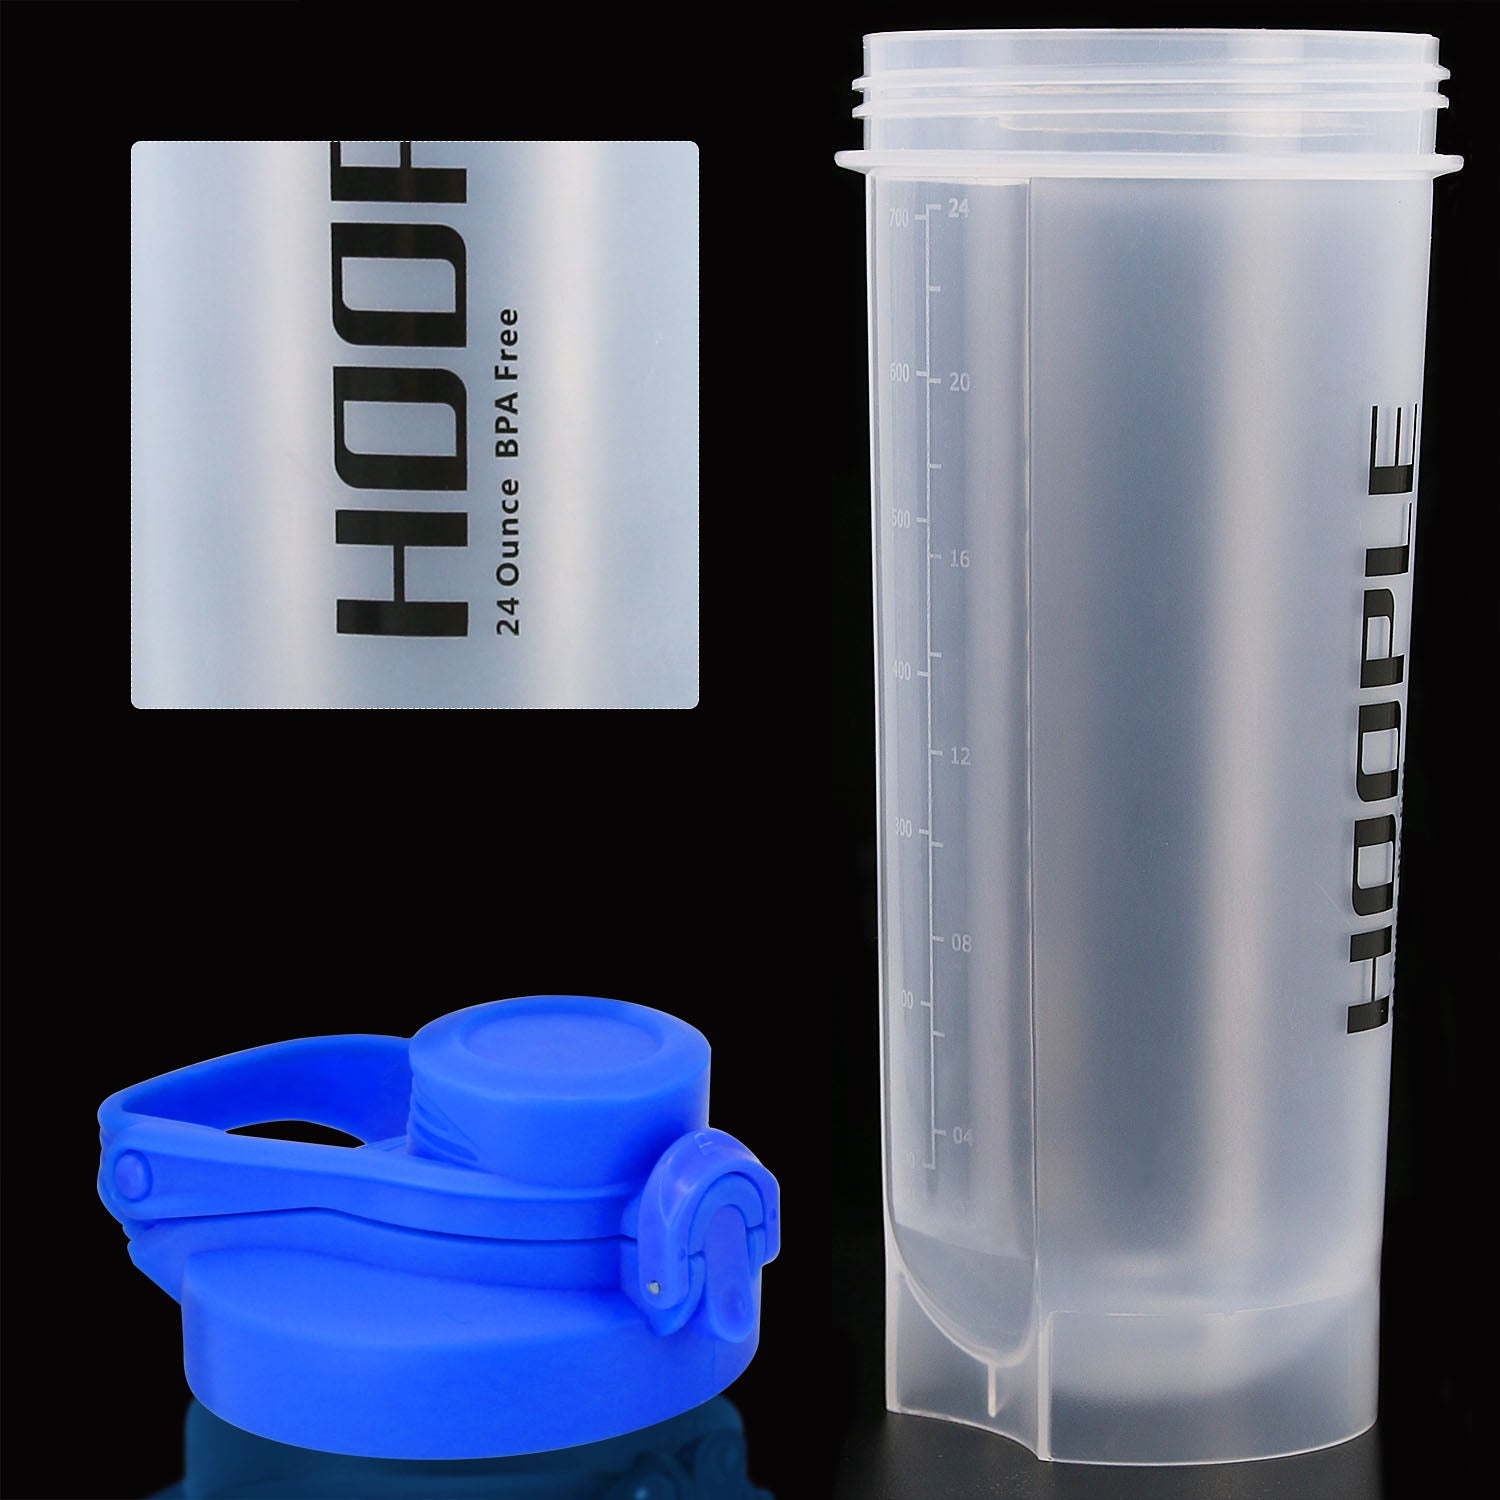 Hoople Protein Shaker Bottle, Gym Sports Water Bottle, Smoothie Mixer Cups, BPA Free, Flip Lid with Powerful Blending Ball Powder Mixing Bottle, 24